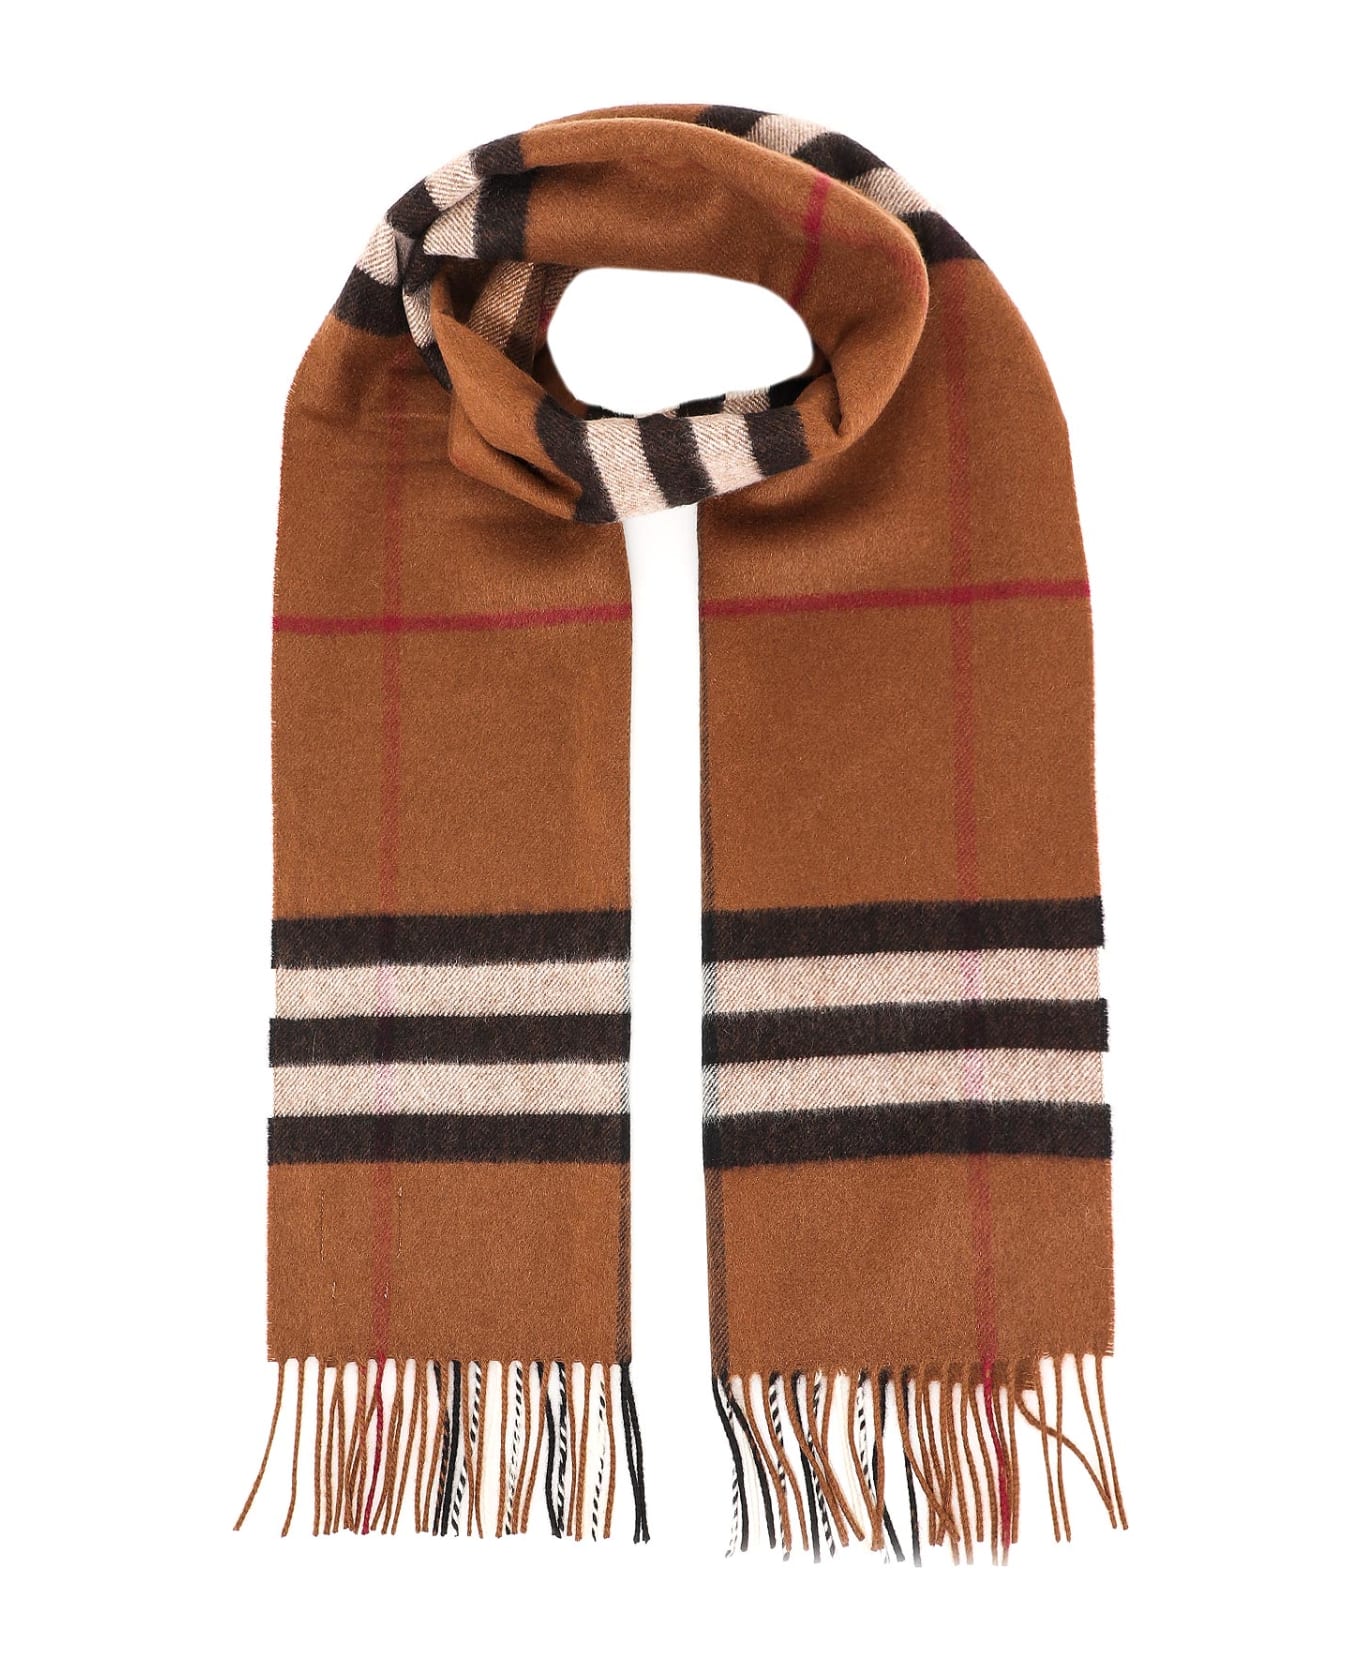 Burberry Scarf - BROWN